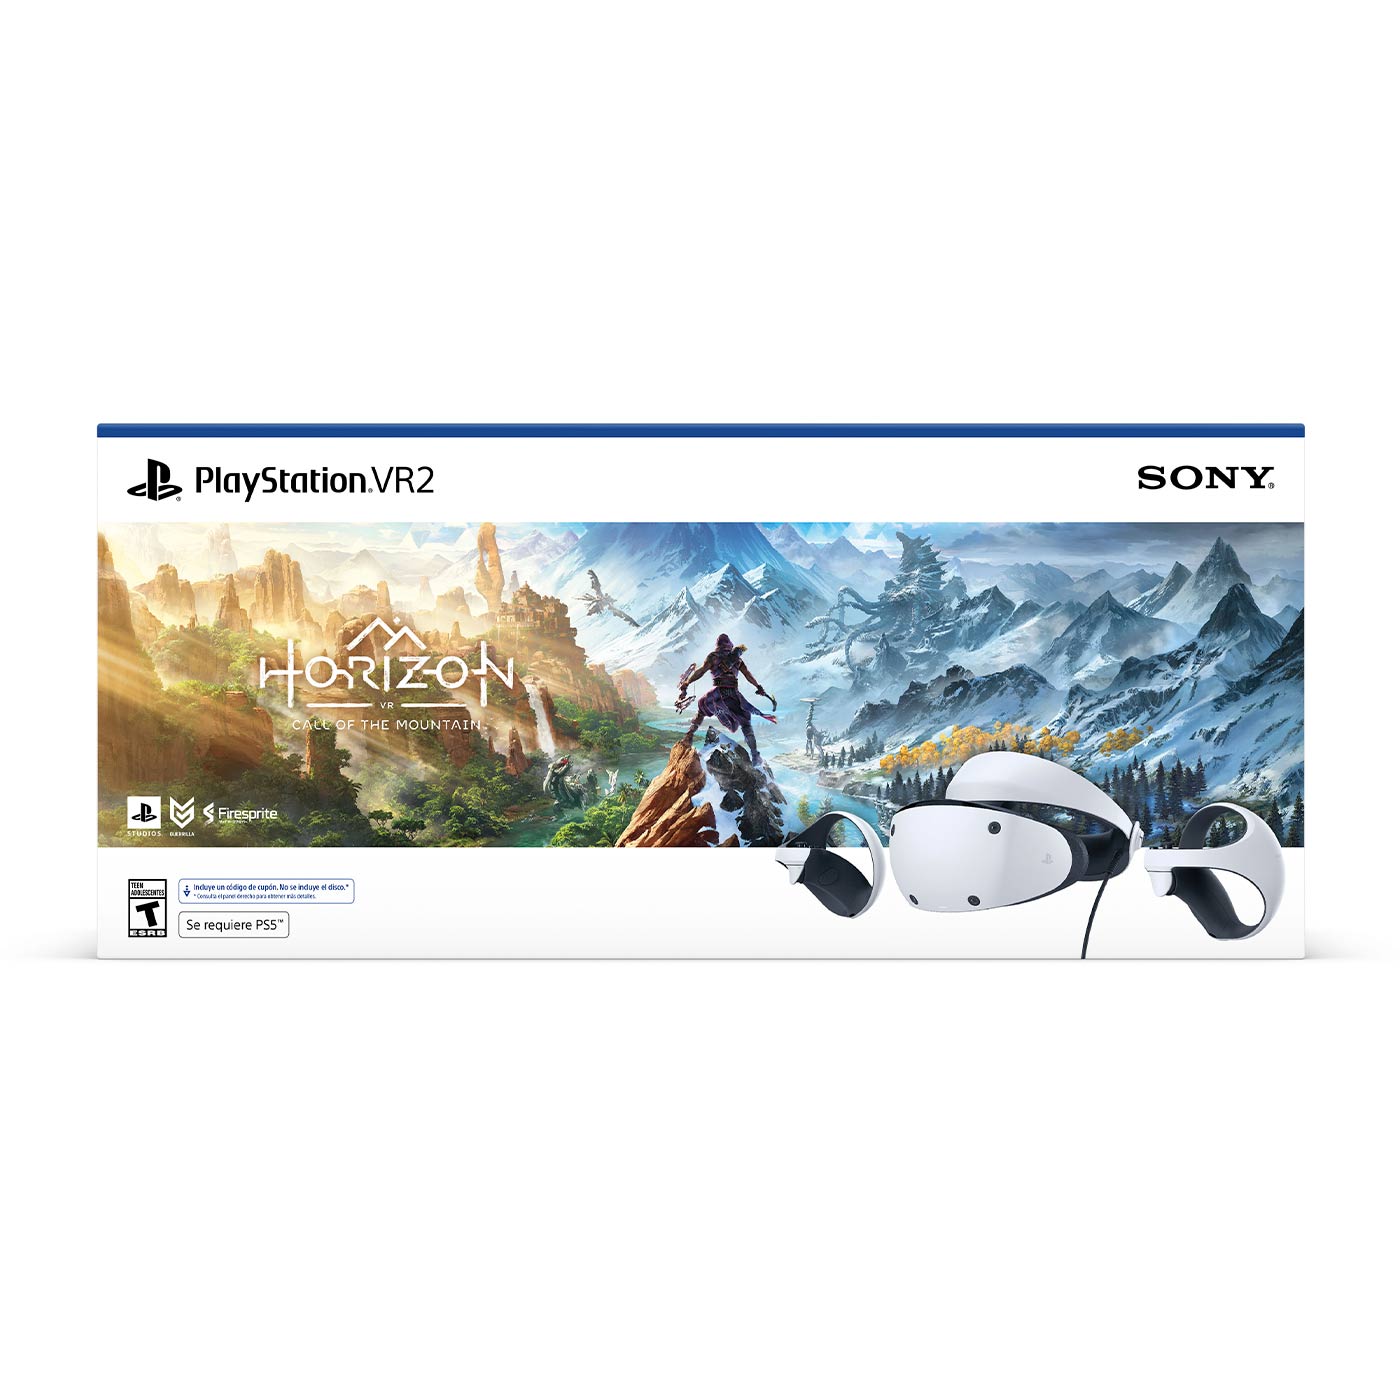 PS5 - Playstation VR2 + Horizon call of the mountain  - Fisico - Nuevo